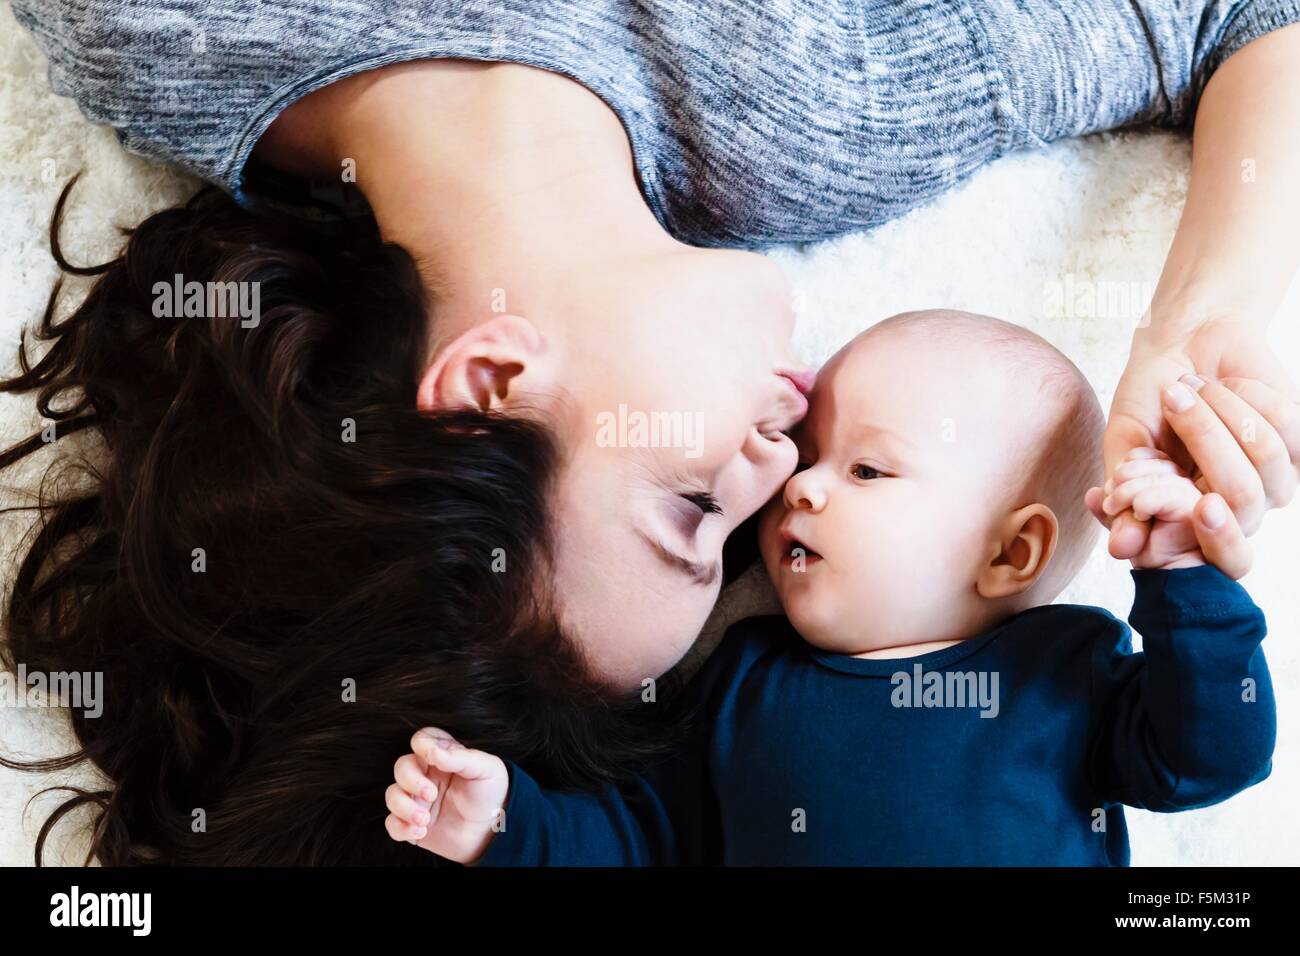 Overhead view, mother kissing baby boy on forehead Stock Photo